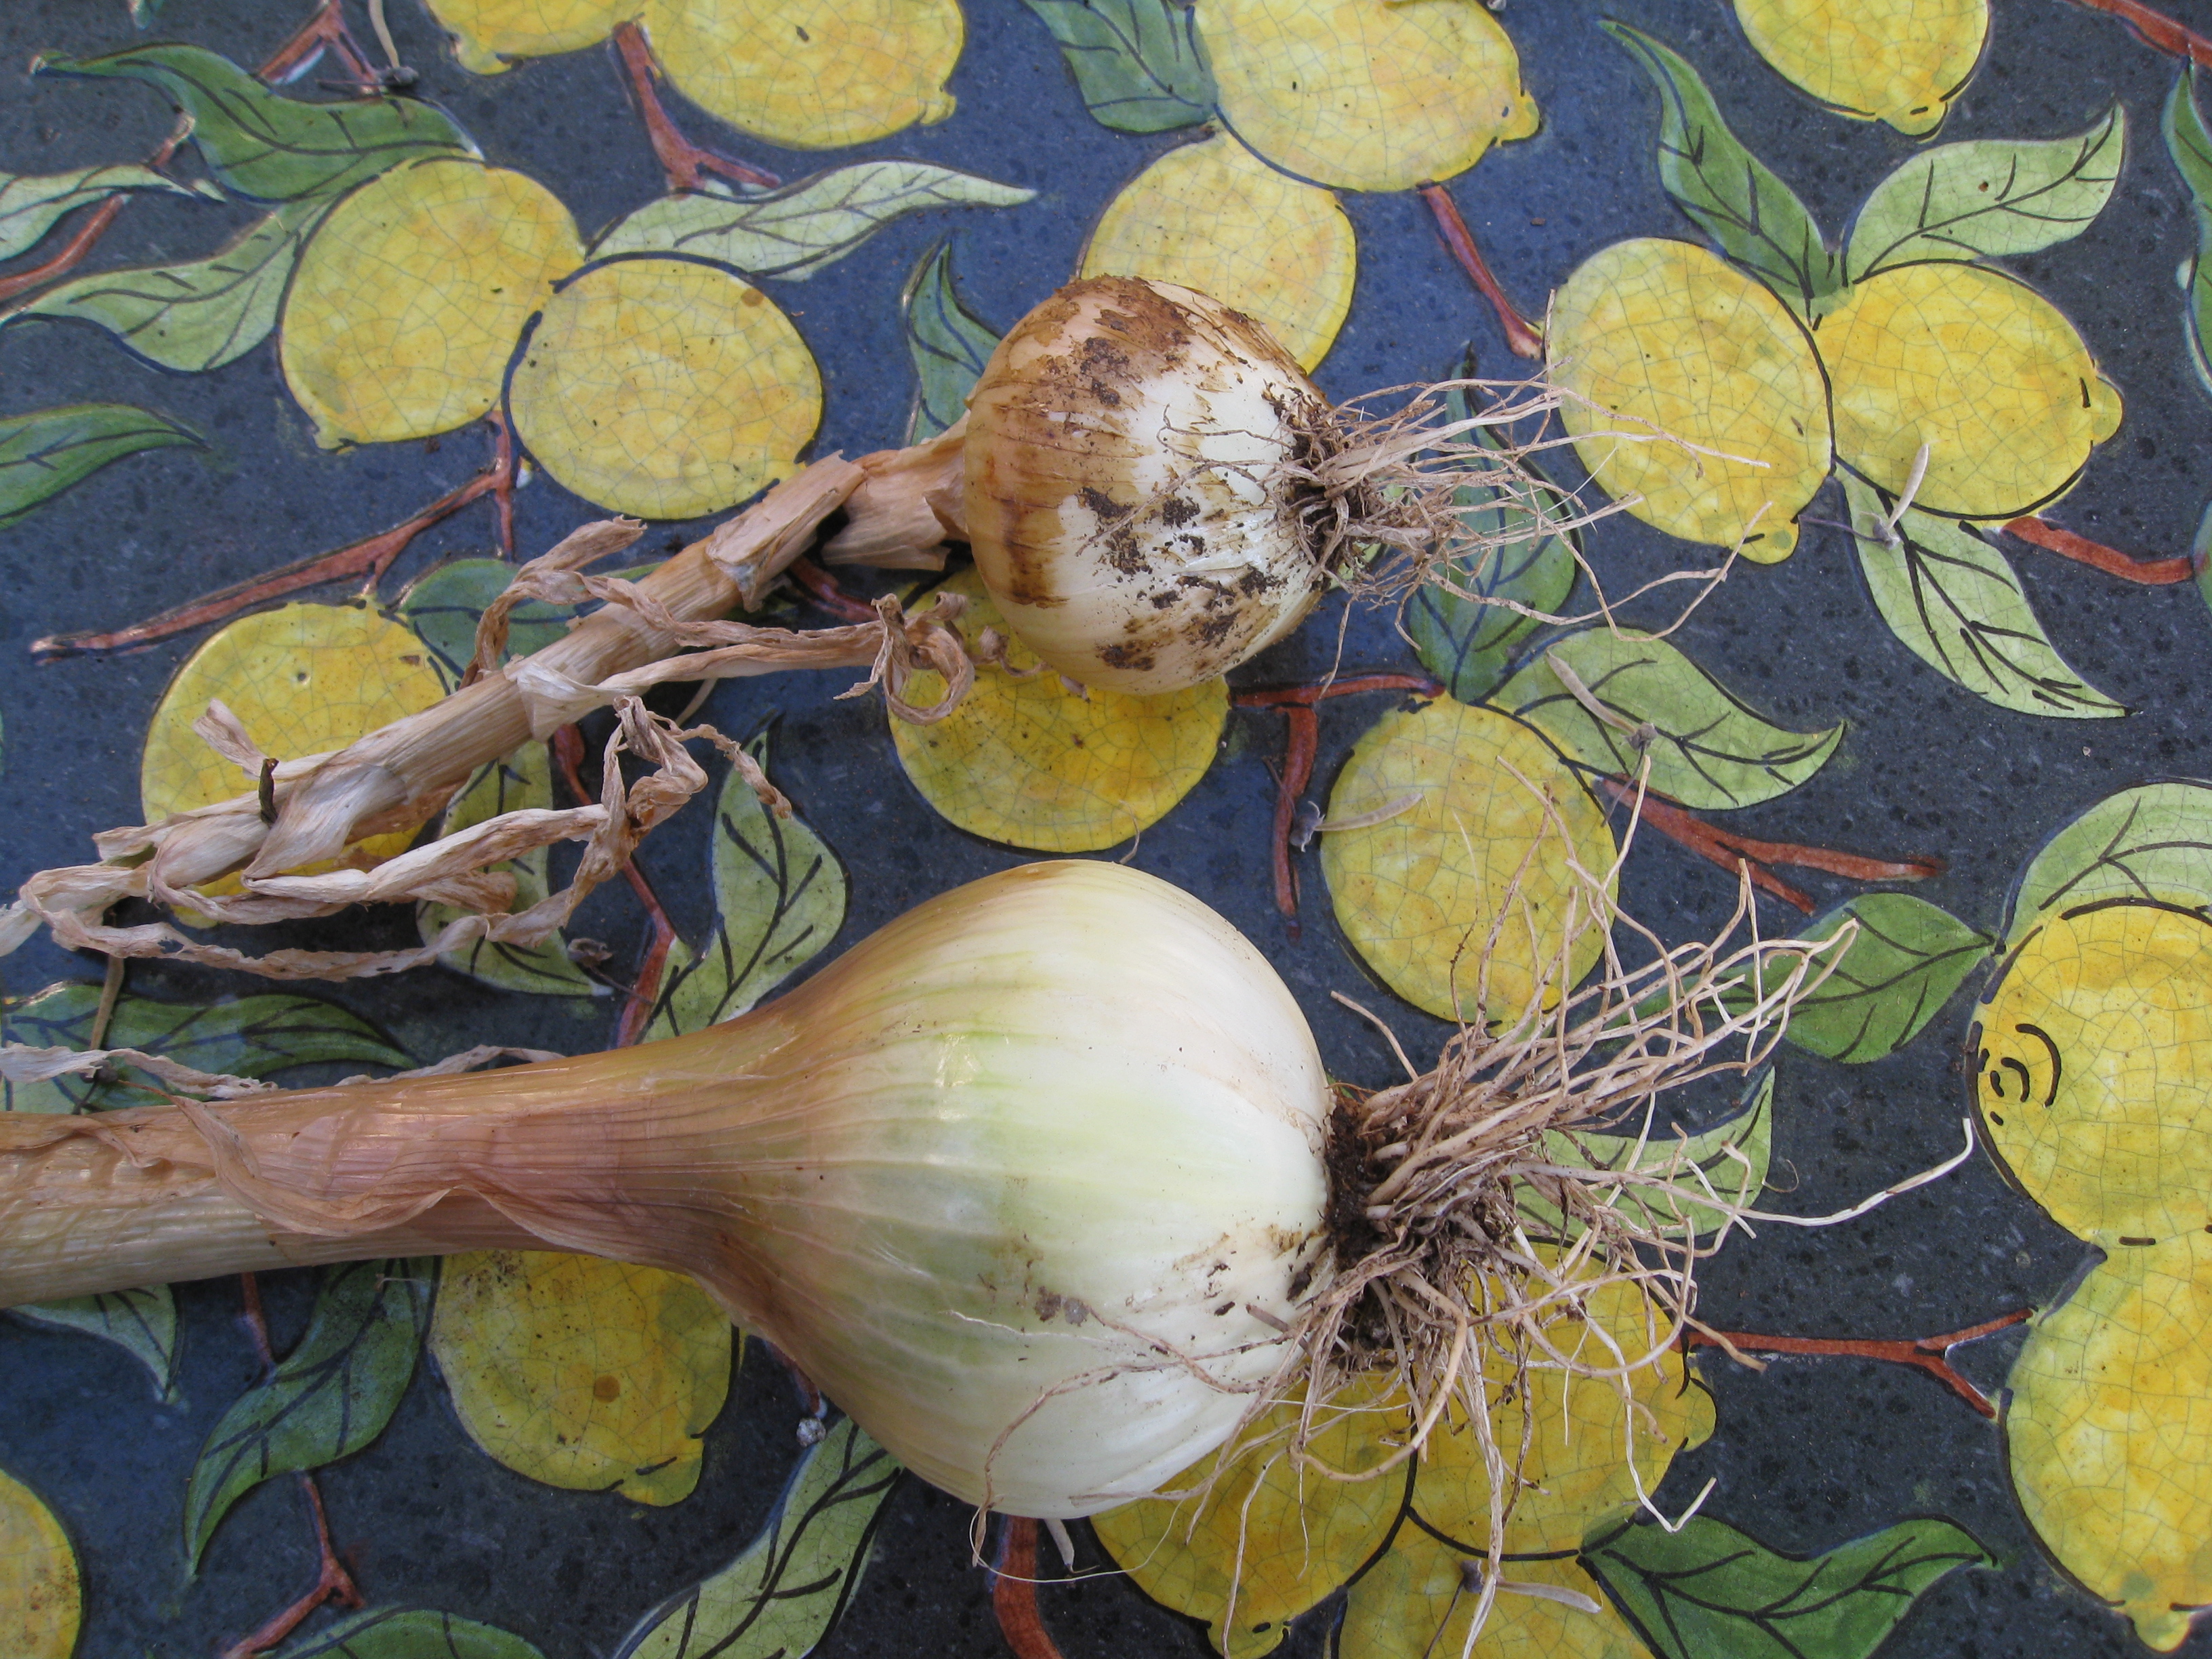 One onion flopped, the other flowered. We pulled them both to dry down for curing. 